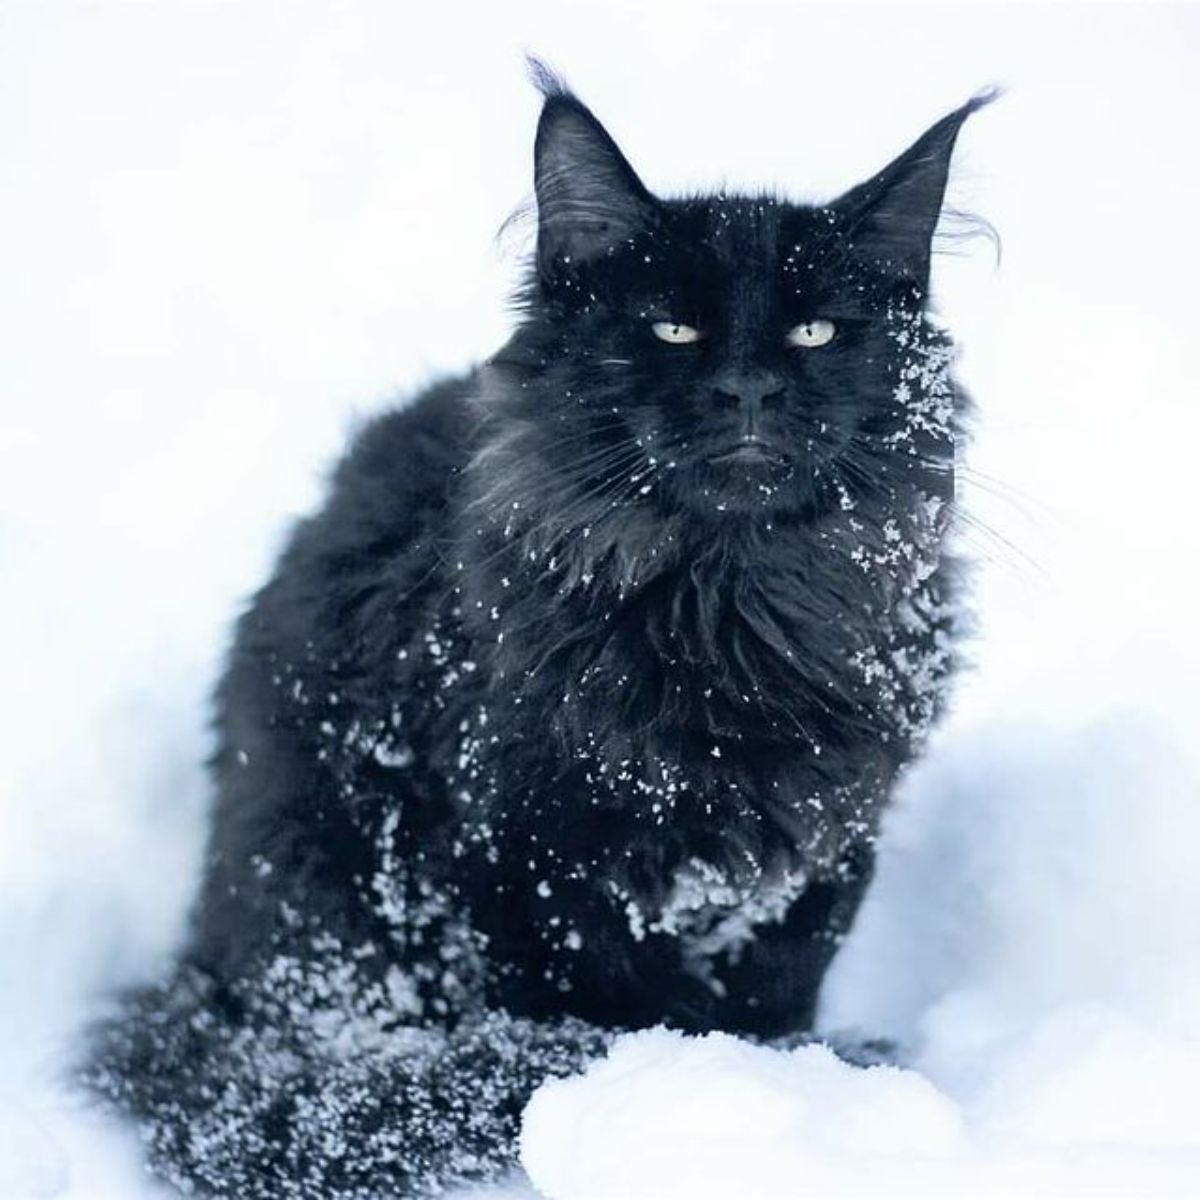 A grumpy-looking black maine coon sitting in the snow.